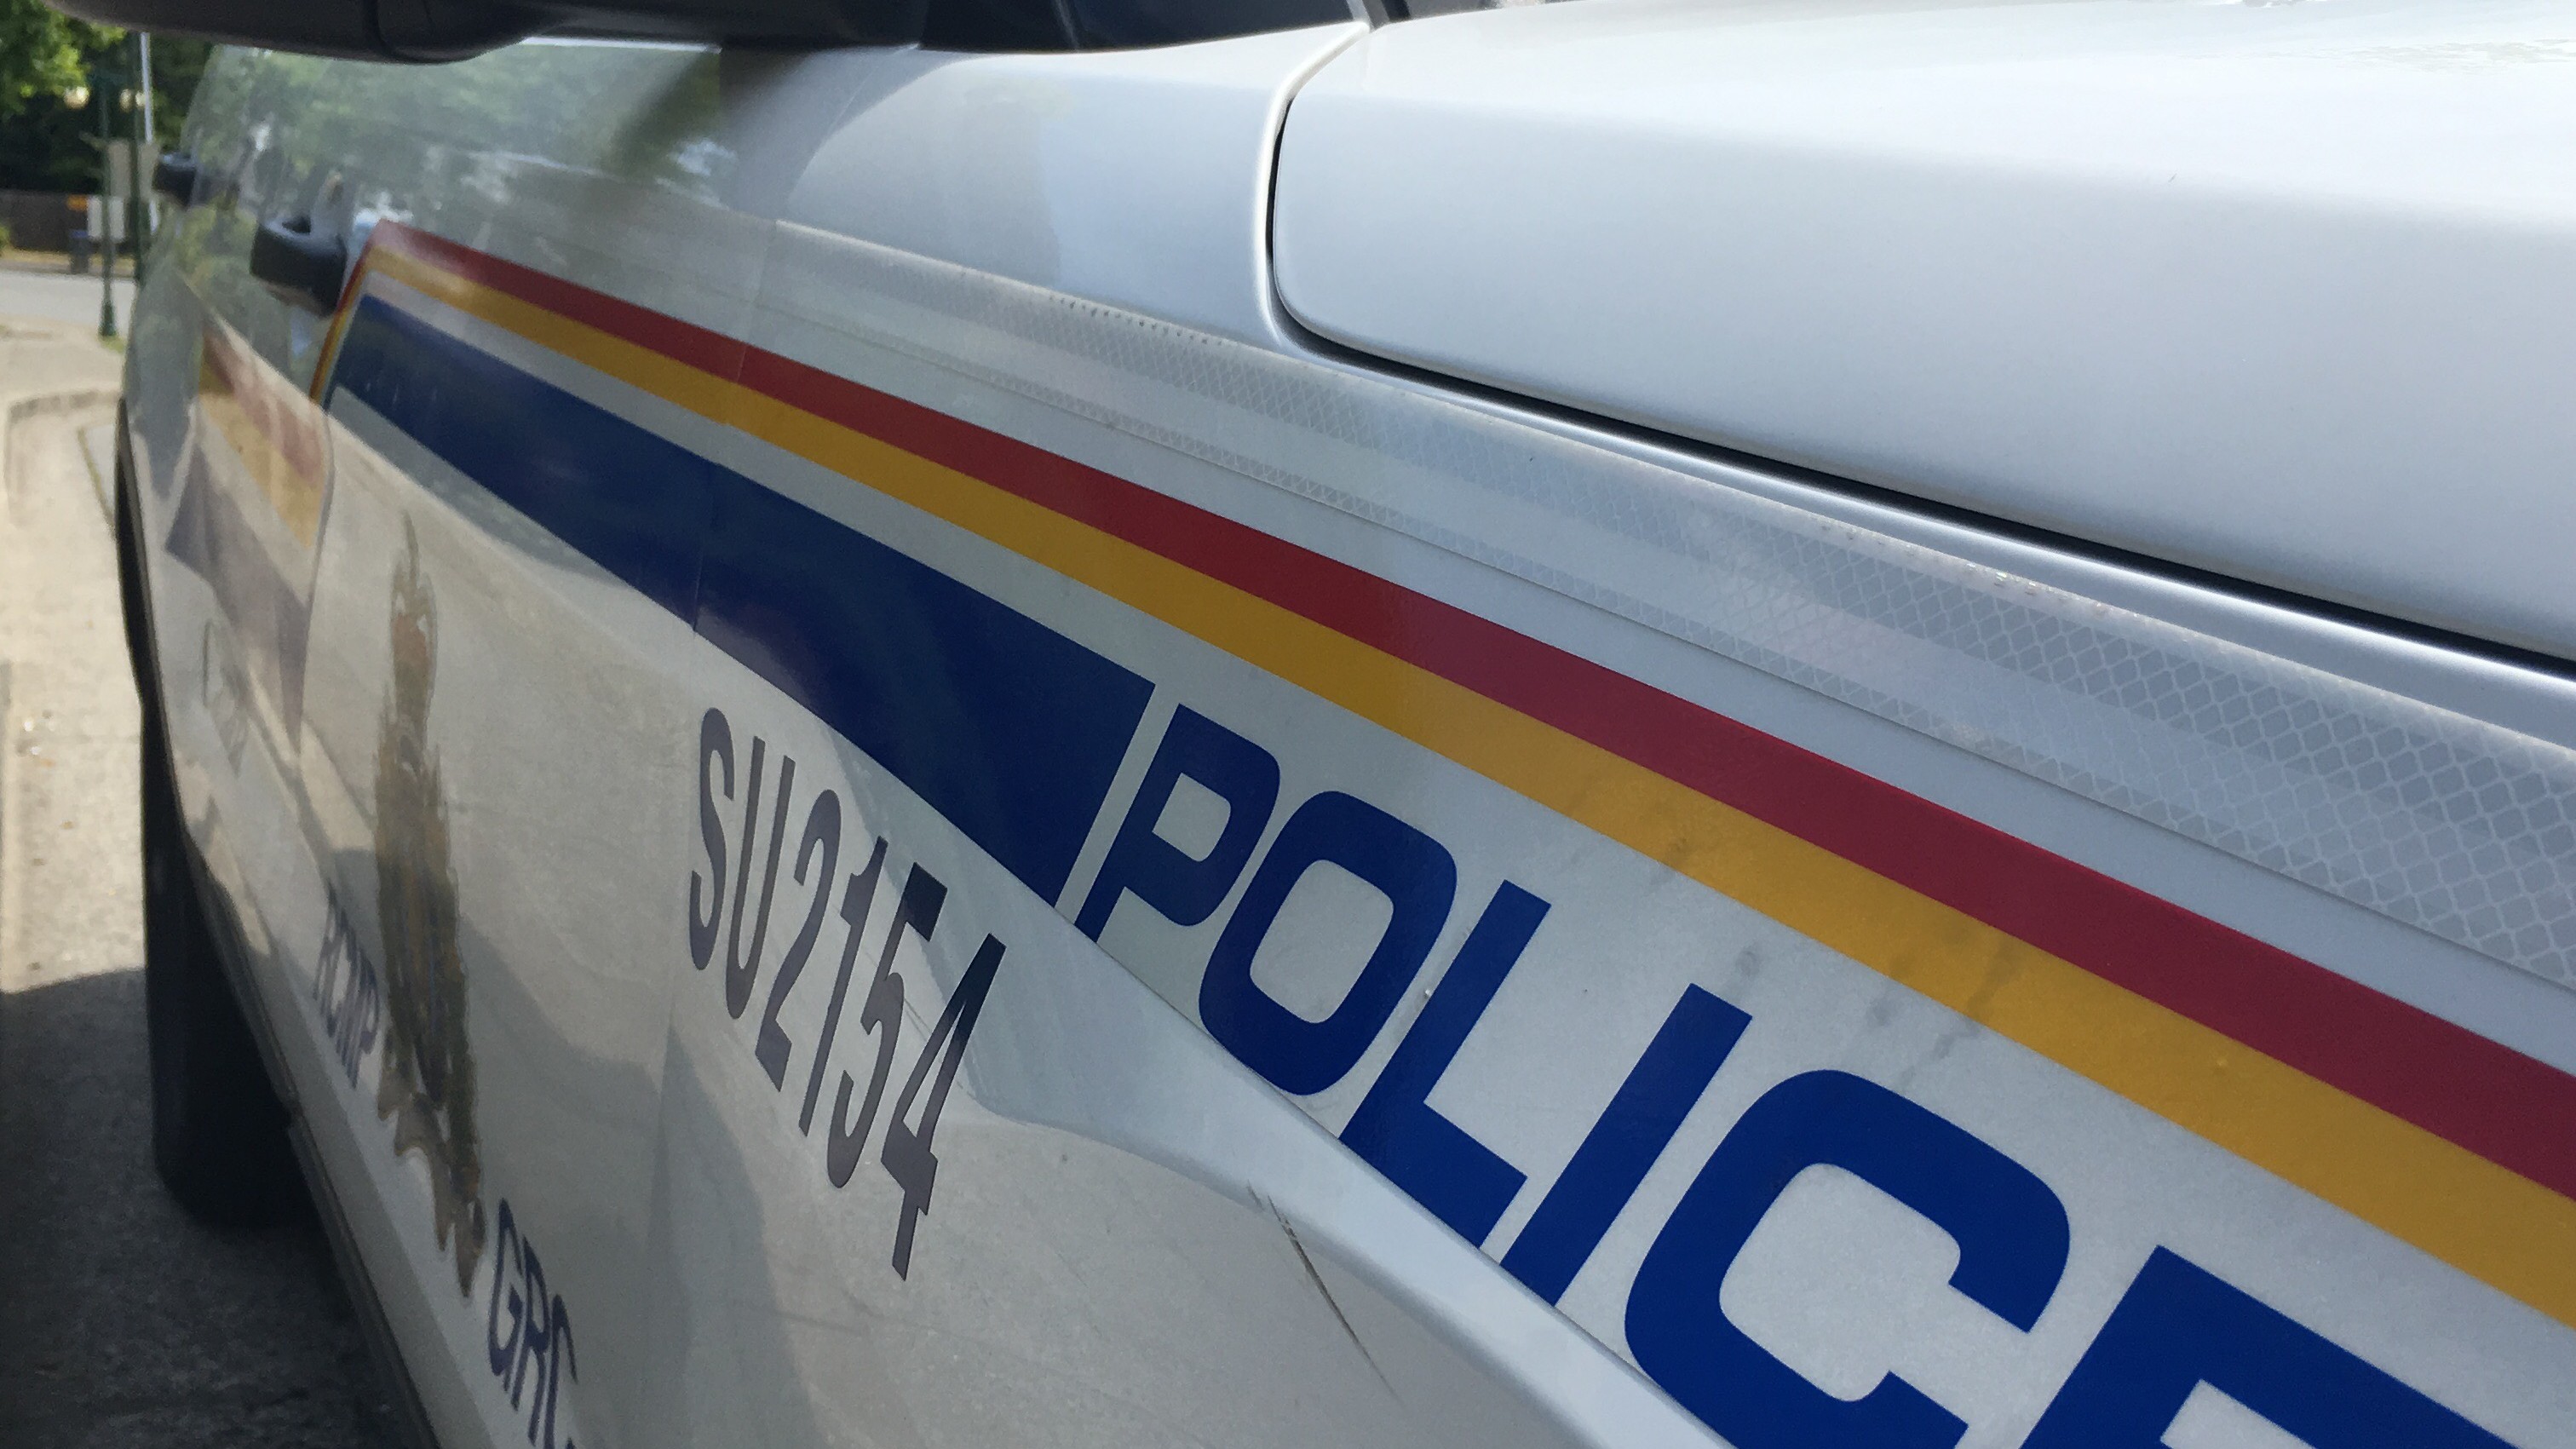 The Surrey RCMP is investigating shots fired in Cloverdale.